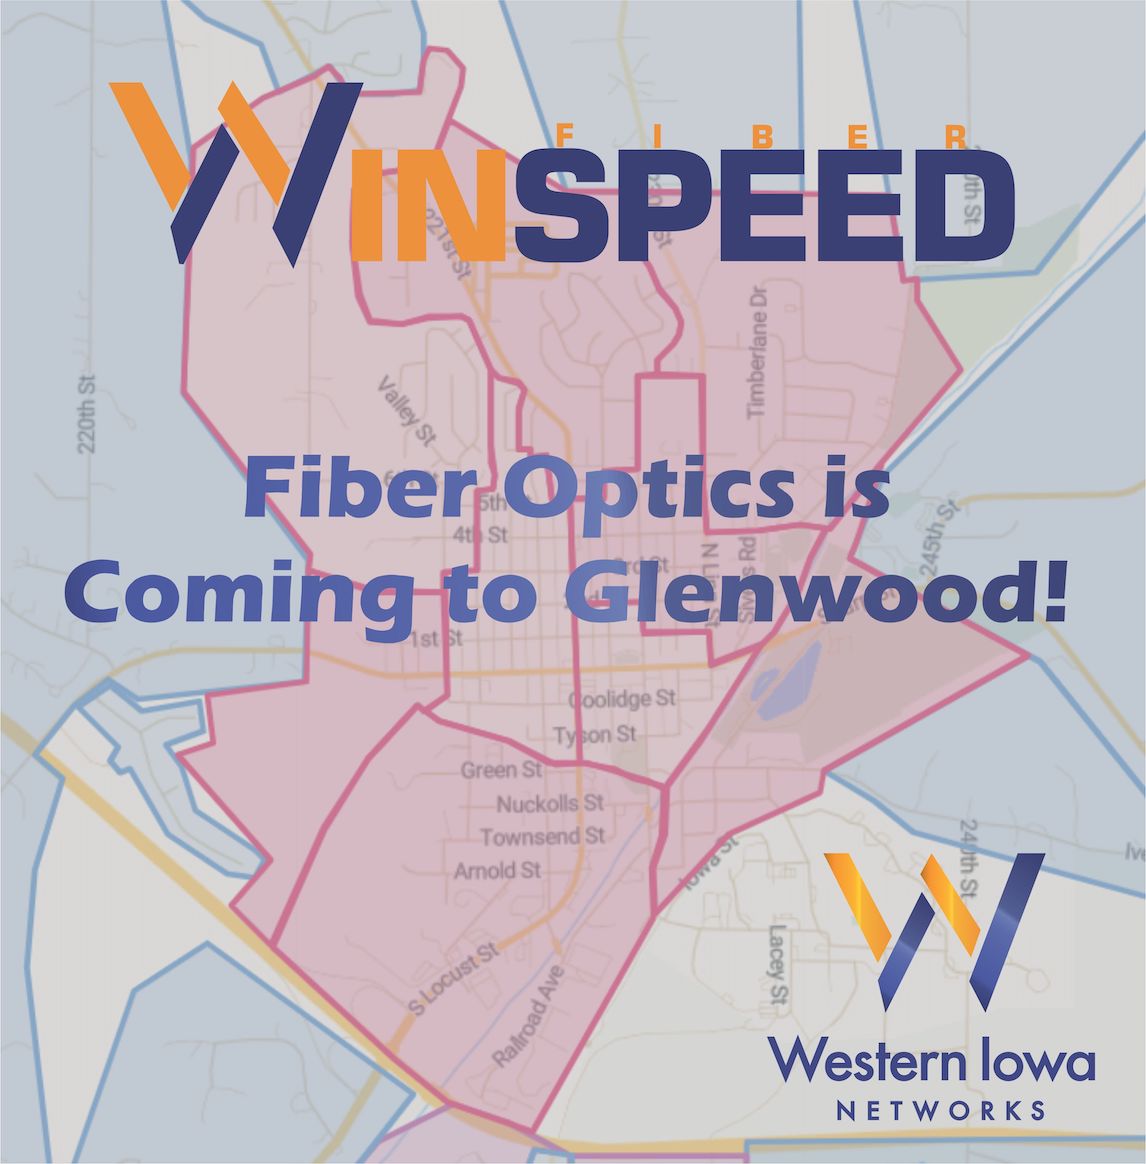 Fiber in Glenwood - Download Images to View